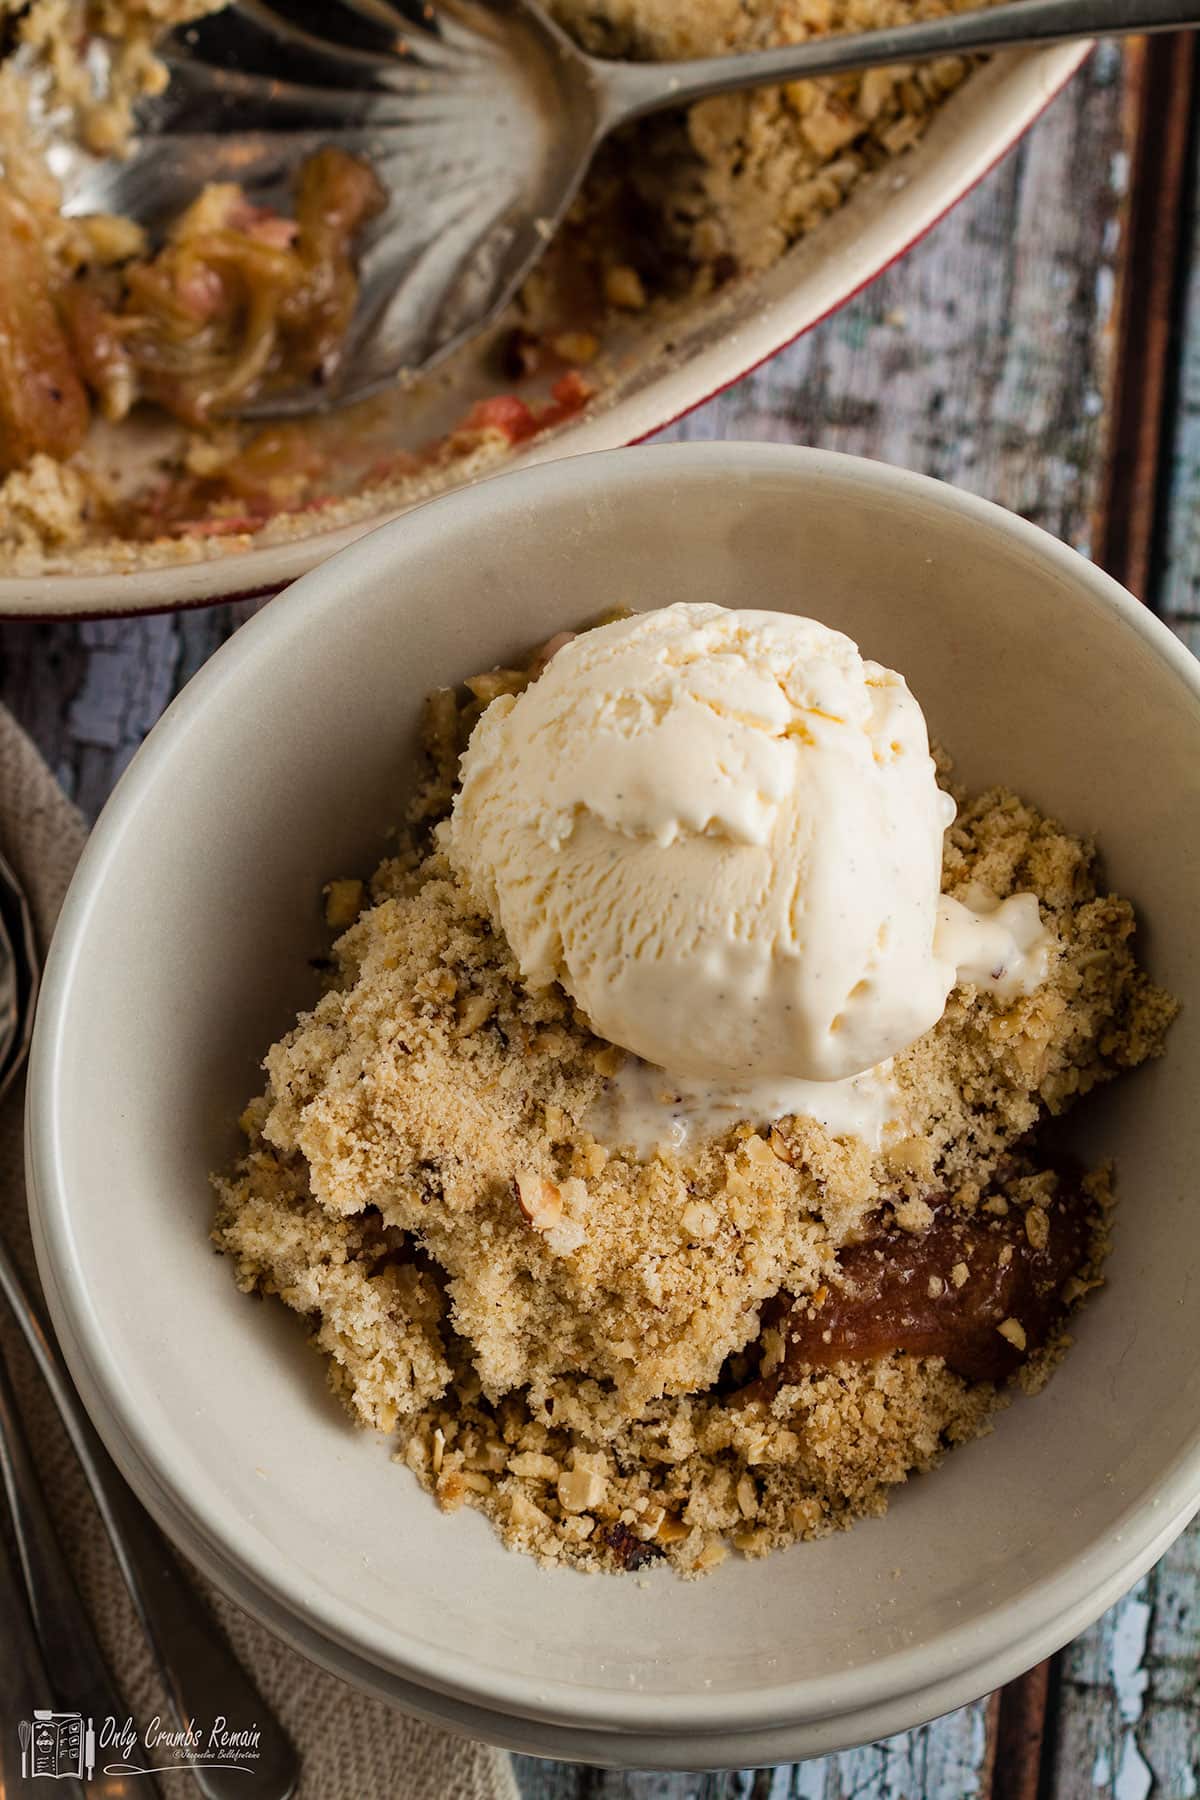 bowl of rhubarb and ginger crumble with icecream.